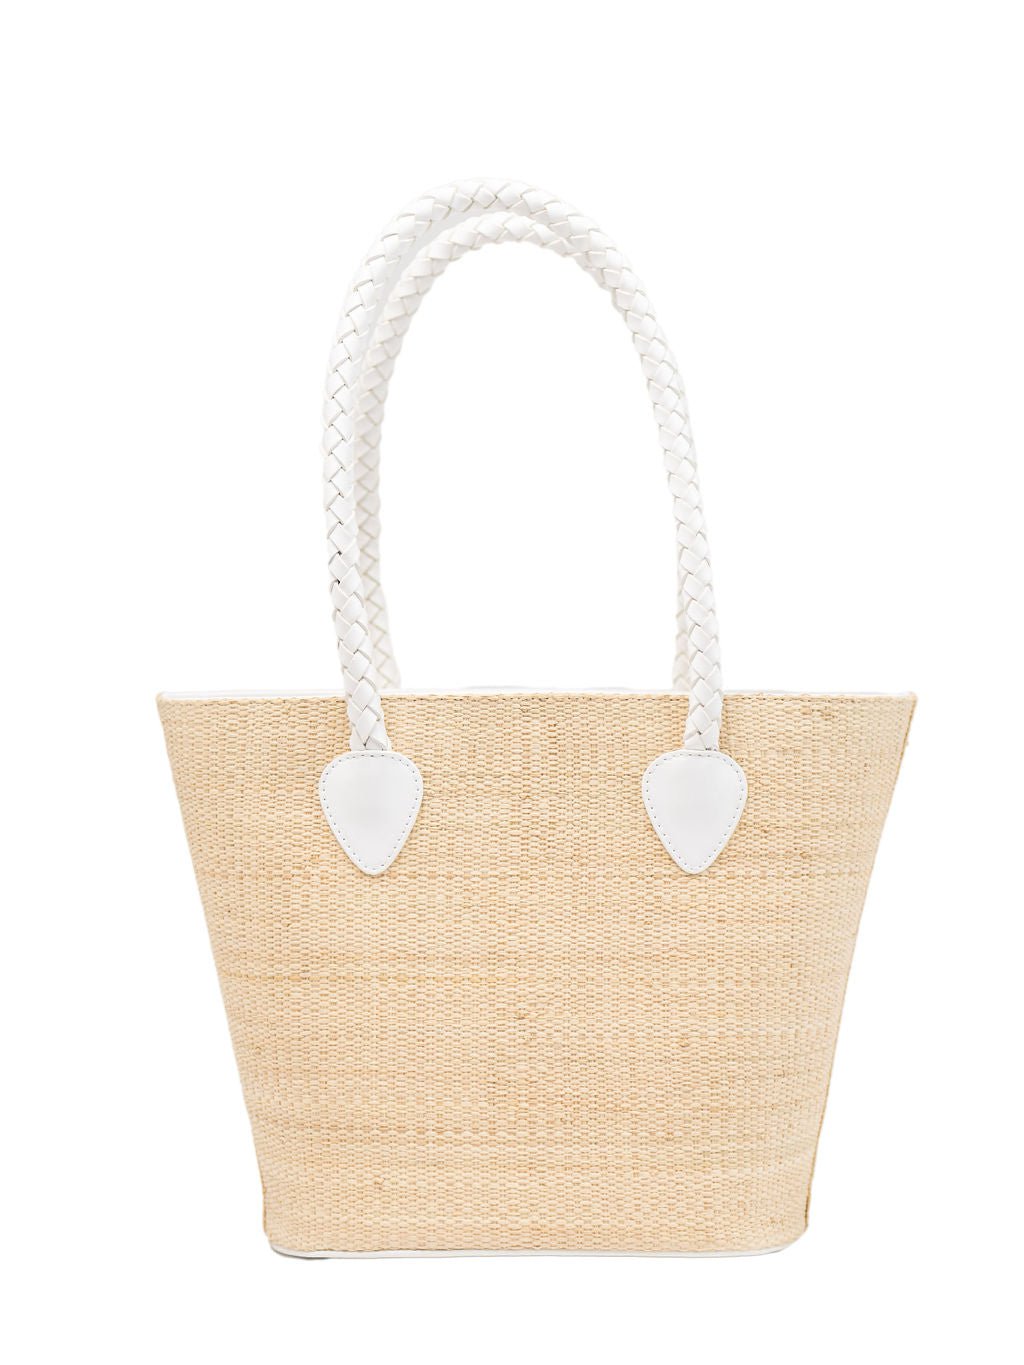 Beau & Ro Clutches White / OS The Maroc Collection Daily Tote in White